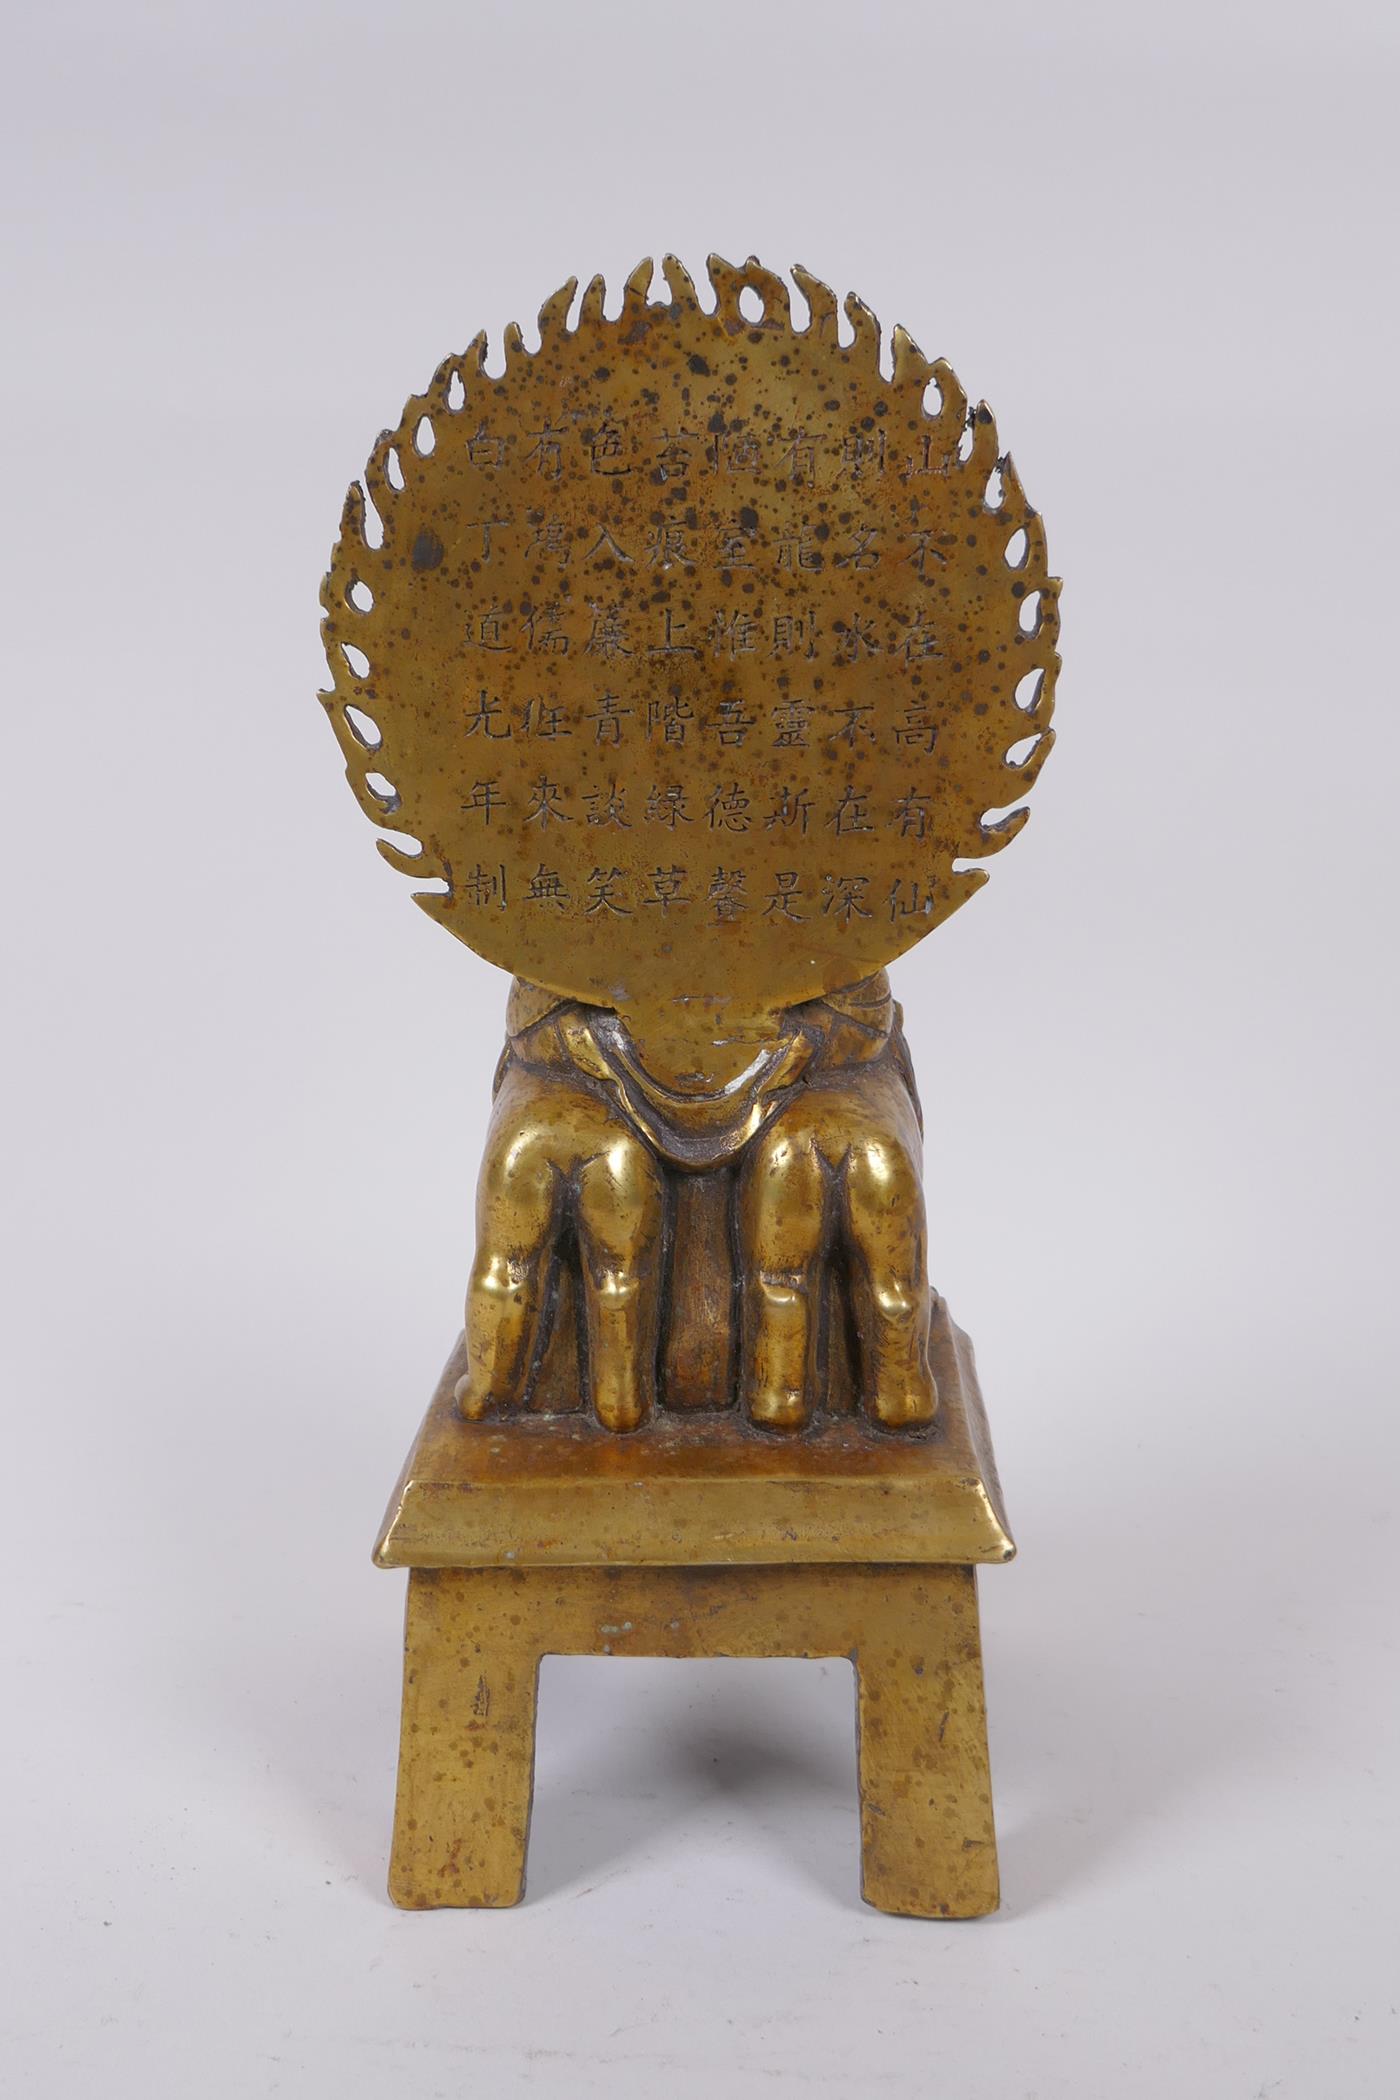 A Sino Tibetan bronze Buddha seated on Fo-dogs, standing on a disc, character inscription verso, - Image 4 of 5